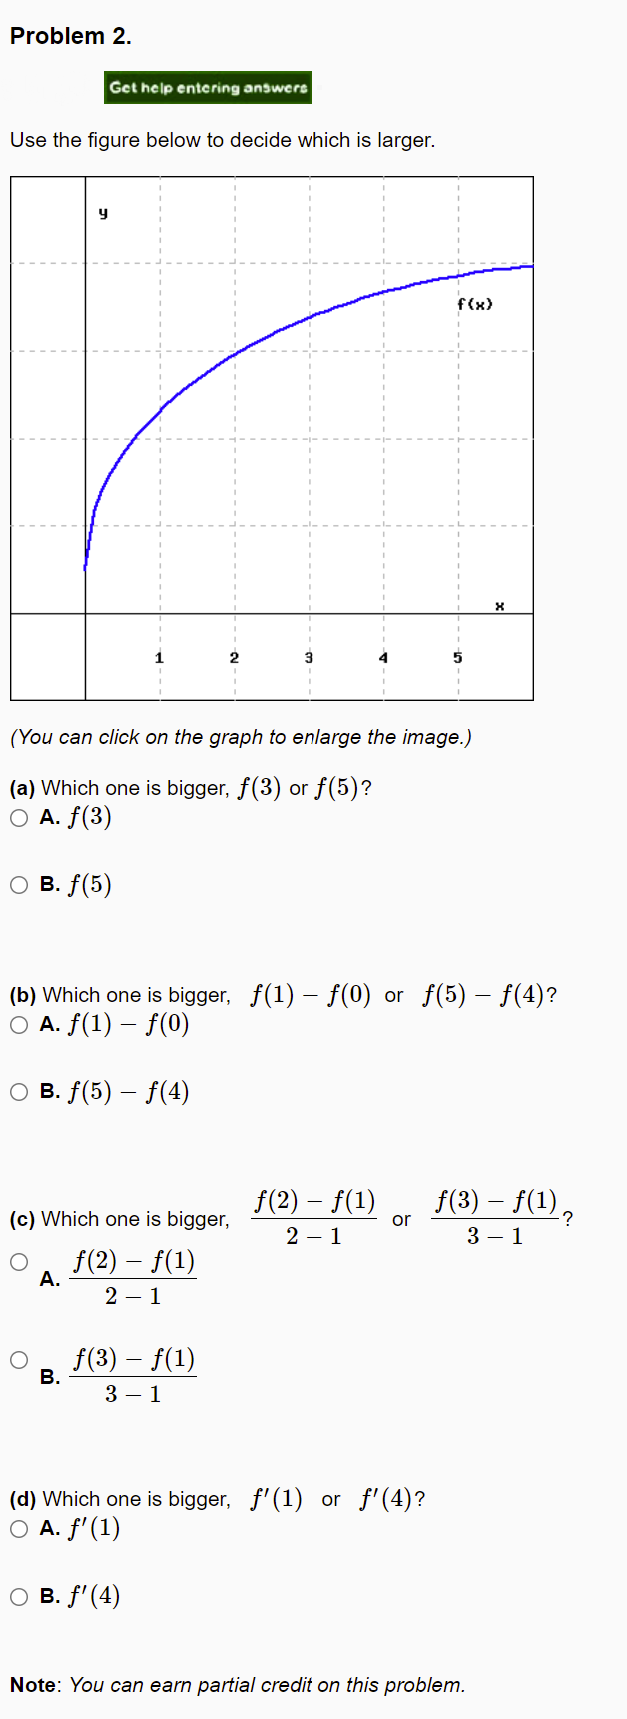 Problem 2.
Get help entering answers
Use the figure below to decide which is larger.
y
f(x)
2.
3
(You can click on the graph to enlarge the image.)
(a) Which one is bigger, f(3) or f(5)?
O A. f(3)
о в. f (5)
(b) Which one is bigger, f(1) – f(0) or f(5) – f(4)?
O A. f(1) – f(0)
O B. f(5) – f(4)
f(2) – f(1)
f(3) – f(1),
(c) Which one is bigger,
or
2 – 1
3 – 1
f(2) – f(1)
А.
2 – 1
f(3) – f(1)
В.
3 – 1
(d) Which one is bigger, f'(1) or f'(4)?
O A. f'(1)
о в. f (4)
Note: You can earn partial credit on this problem.
